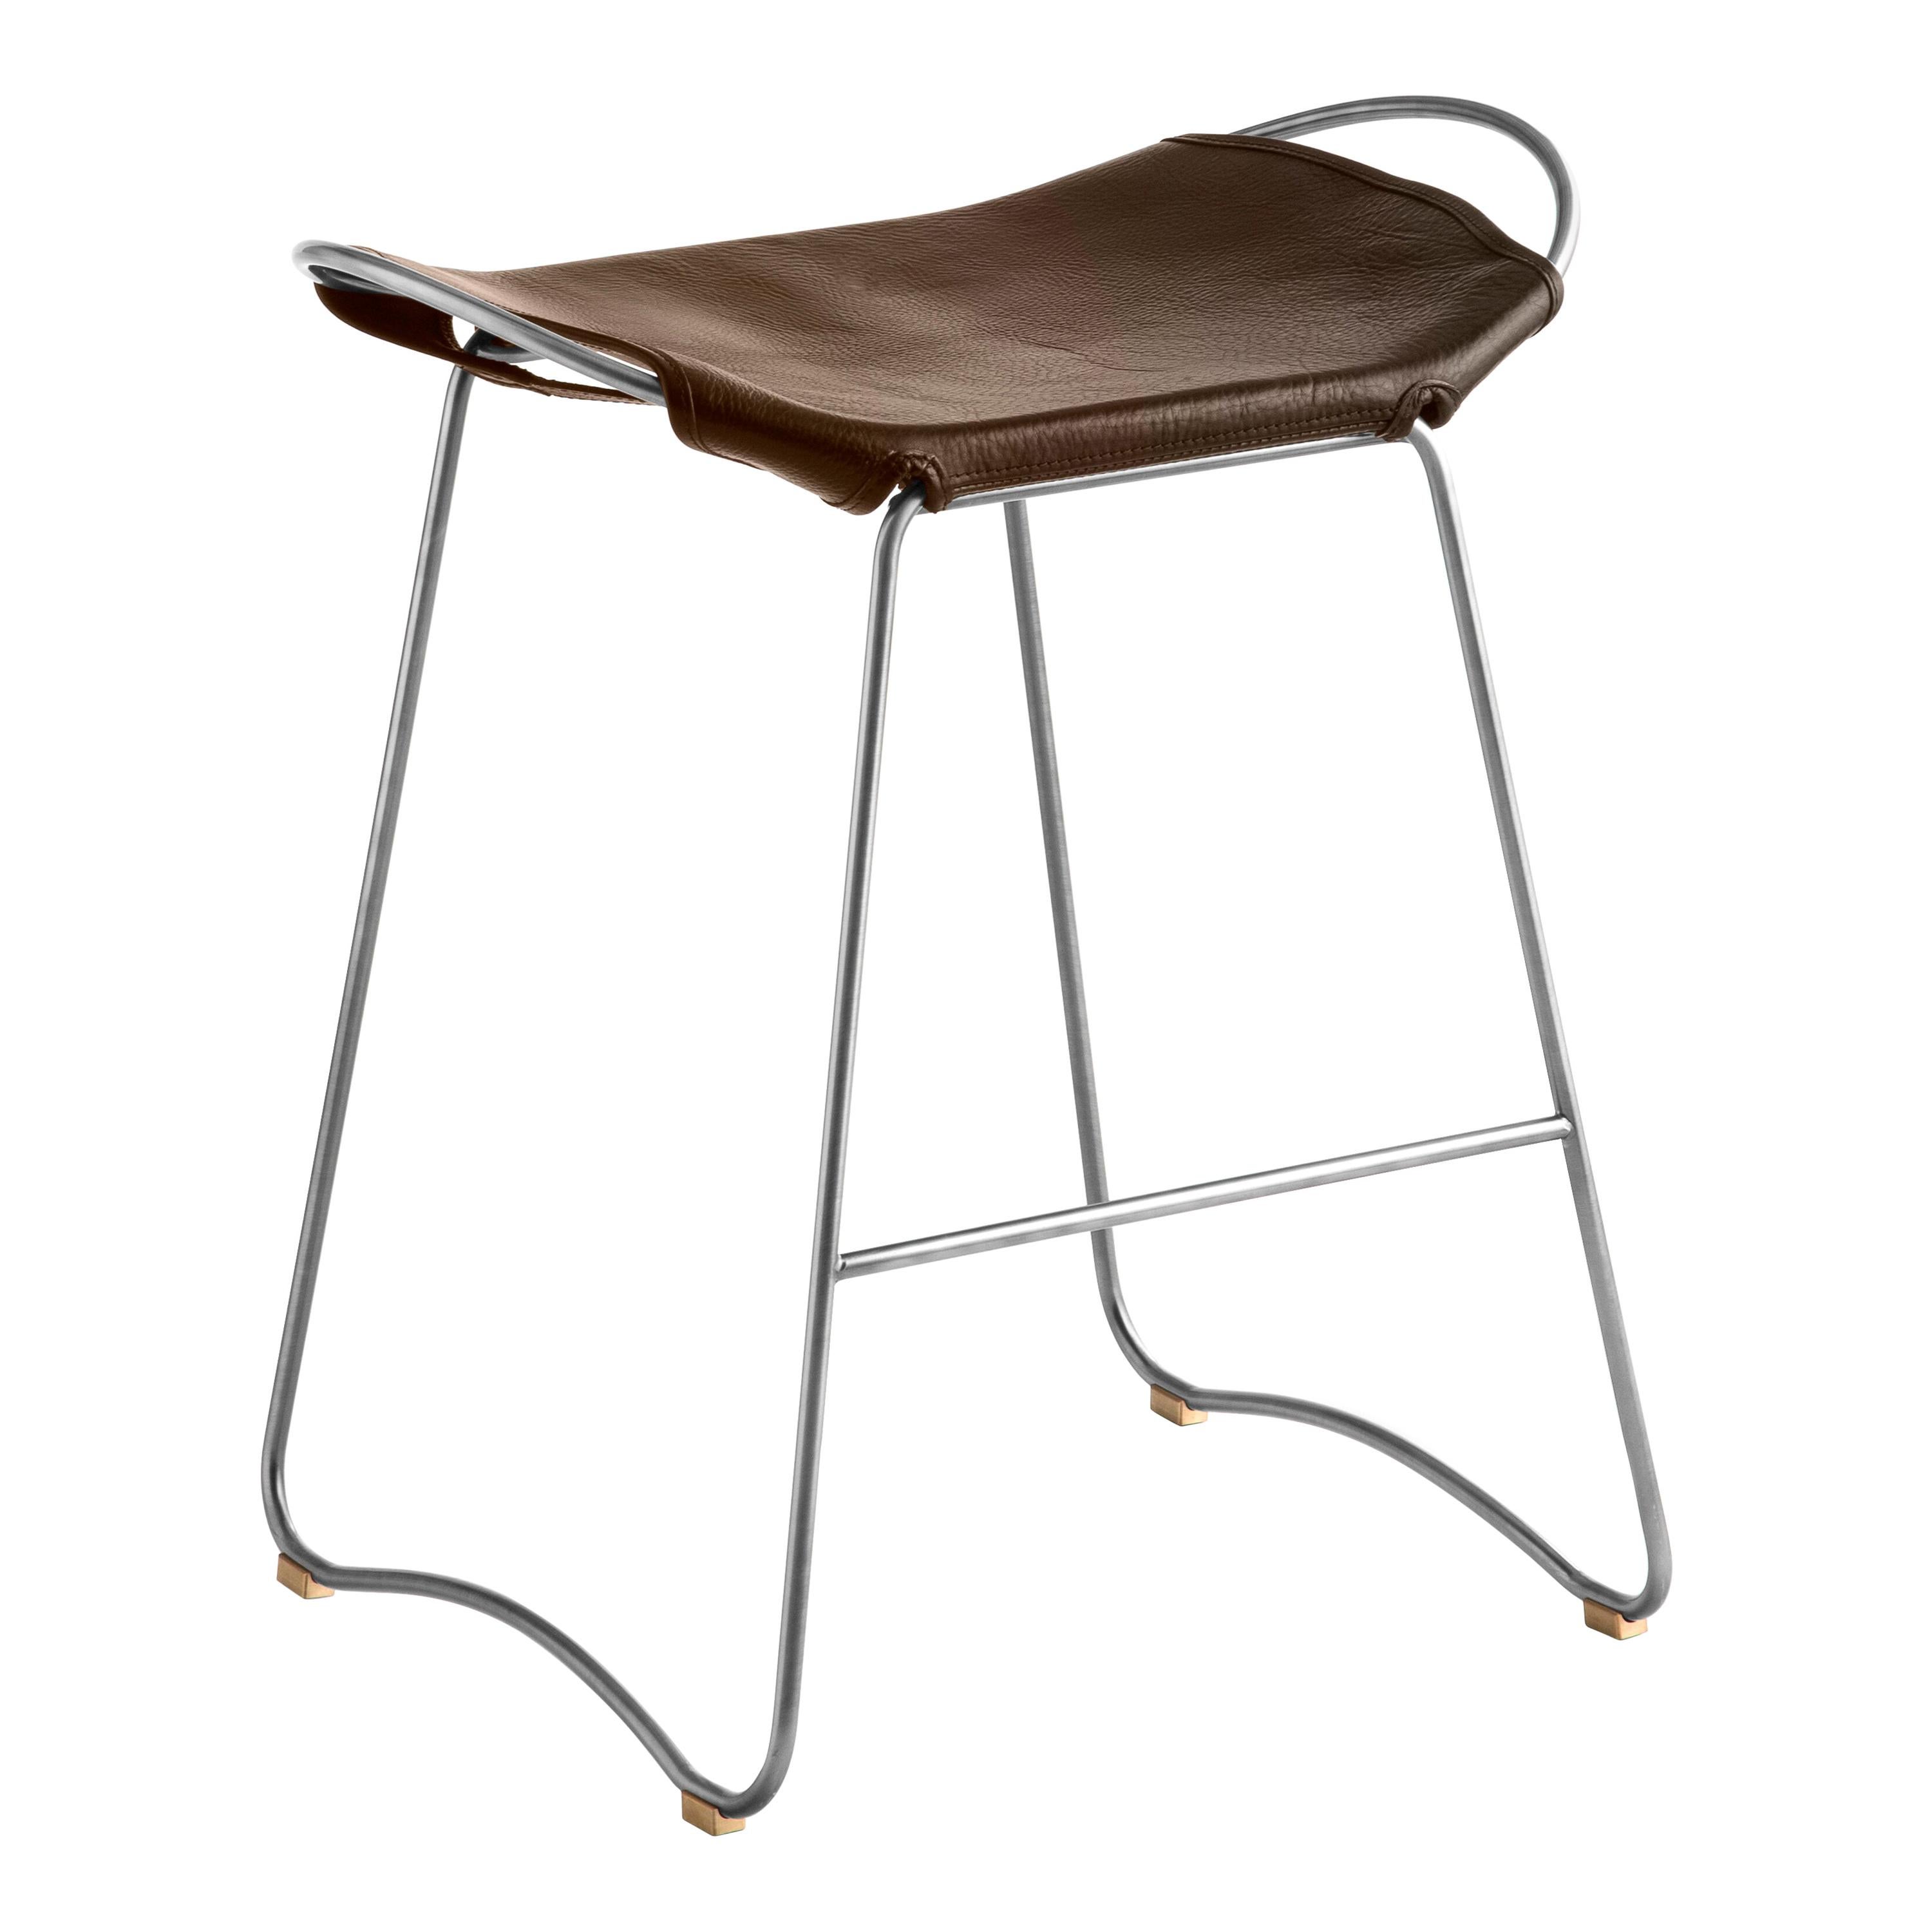 Organic Contemporary Bar Stool, Old Silver Metal & Dark Brown Leather